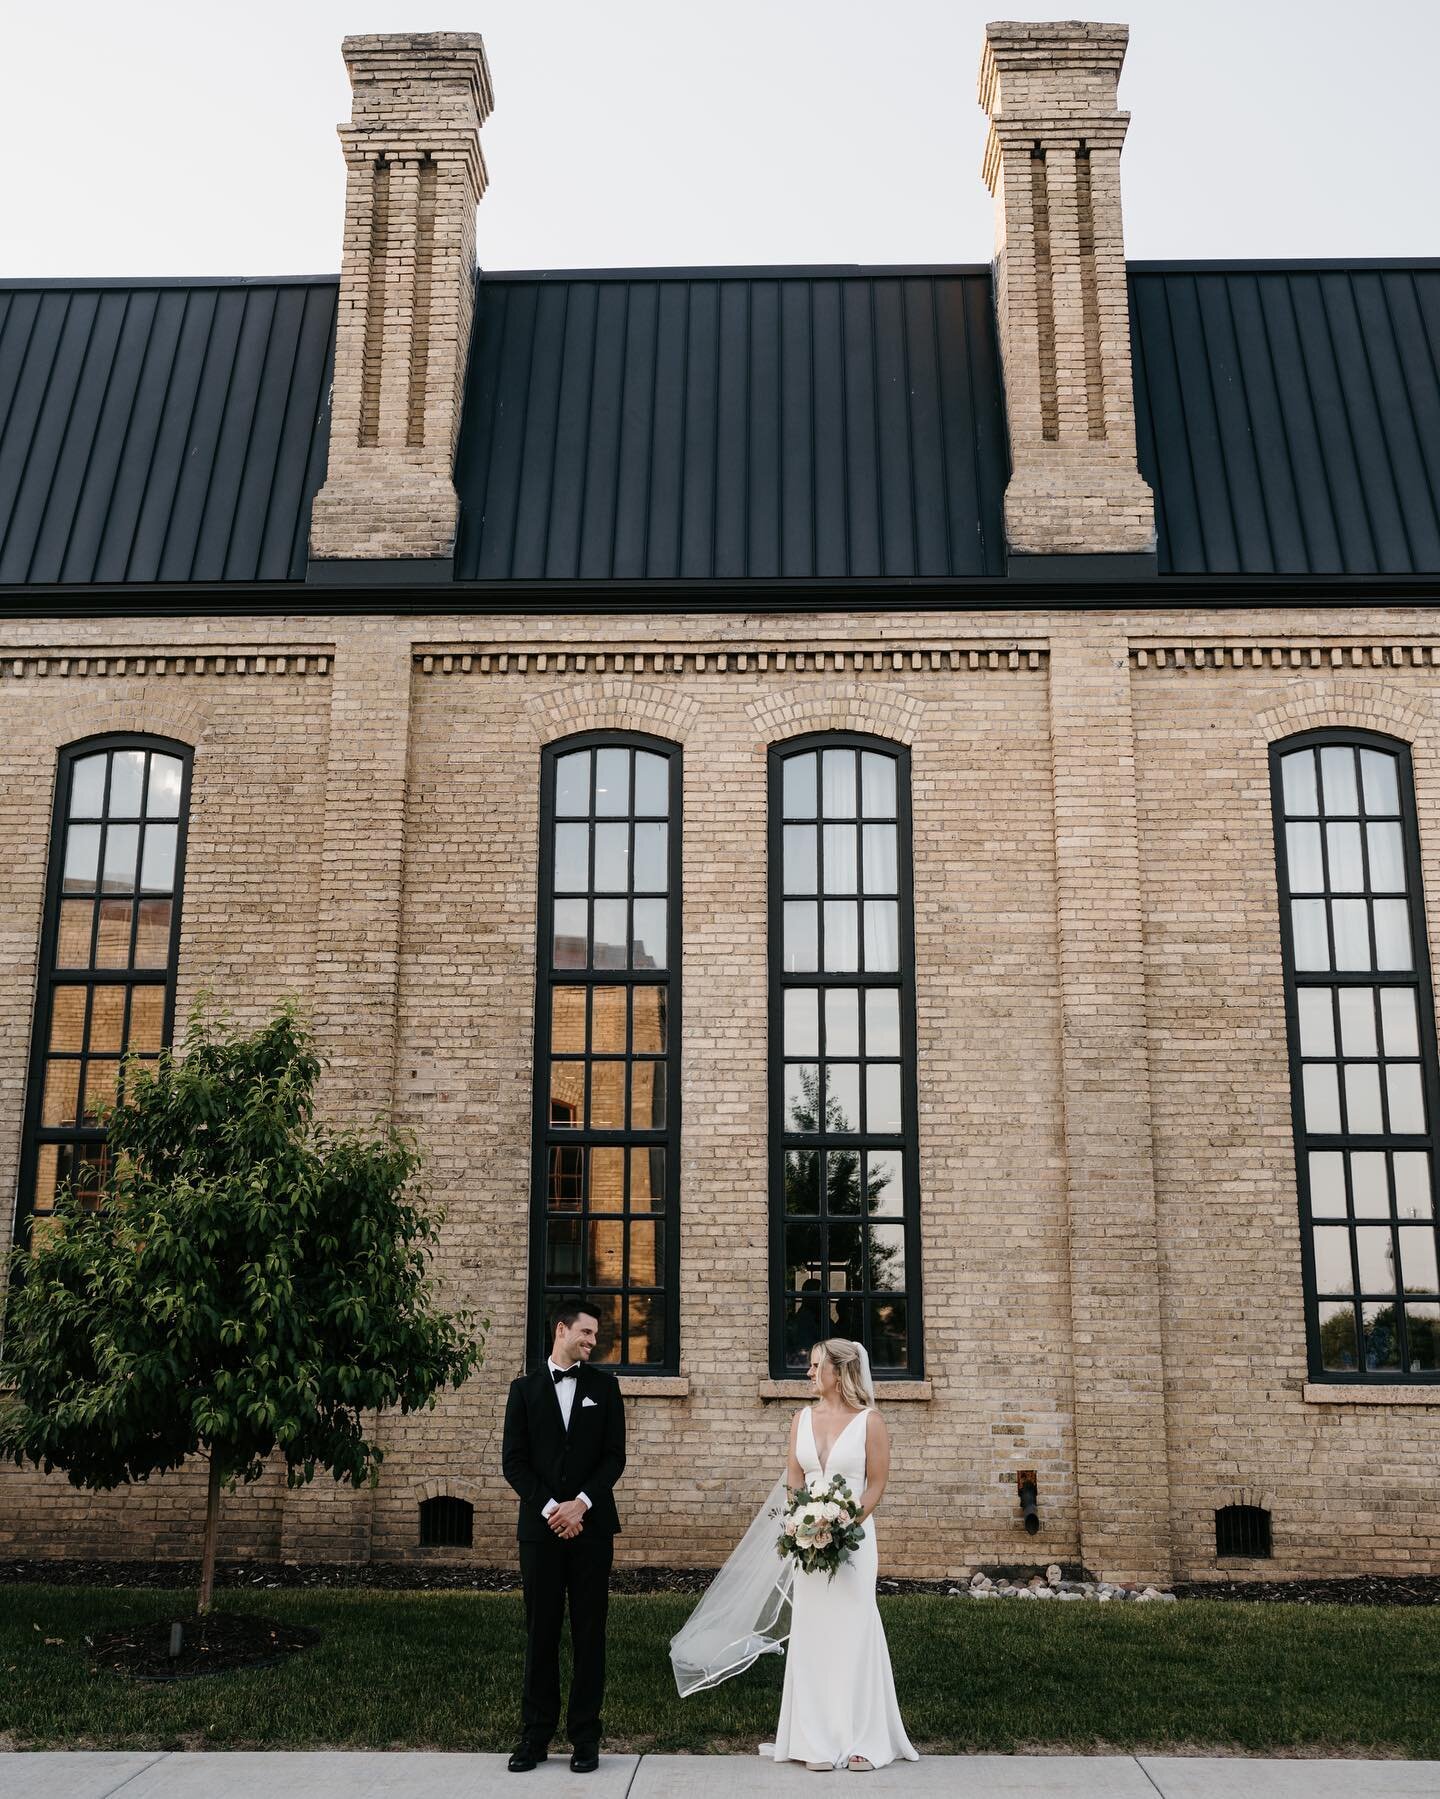 Jake &amp; Kelsey at @theessencemn. These two are the sweetest &amp; their wedding day was so much fun! 🤩